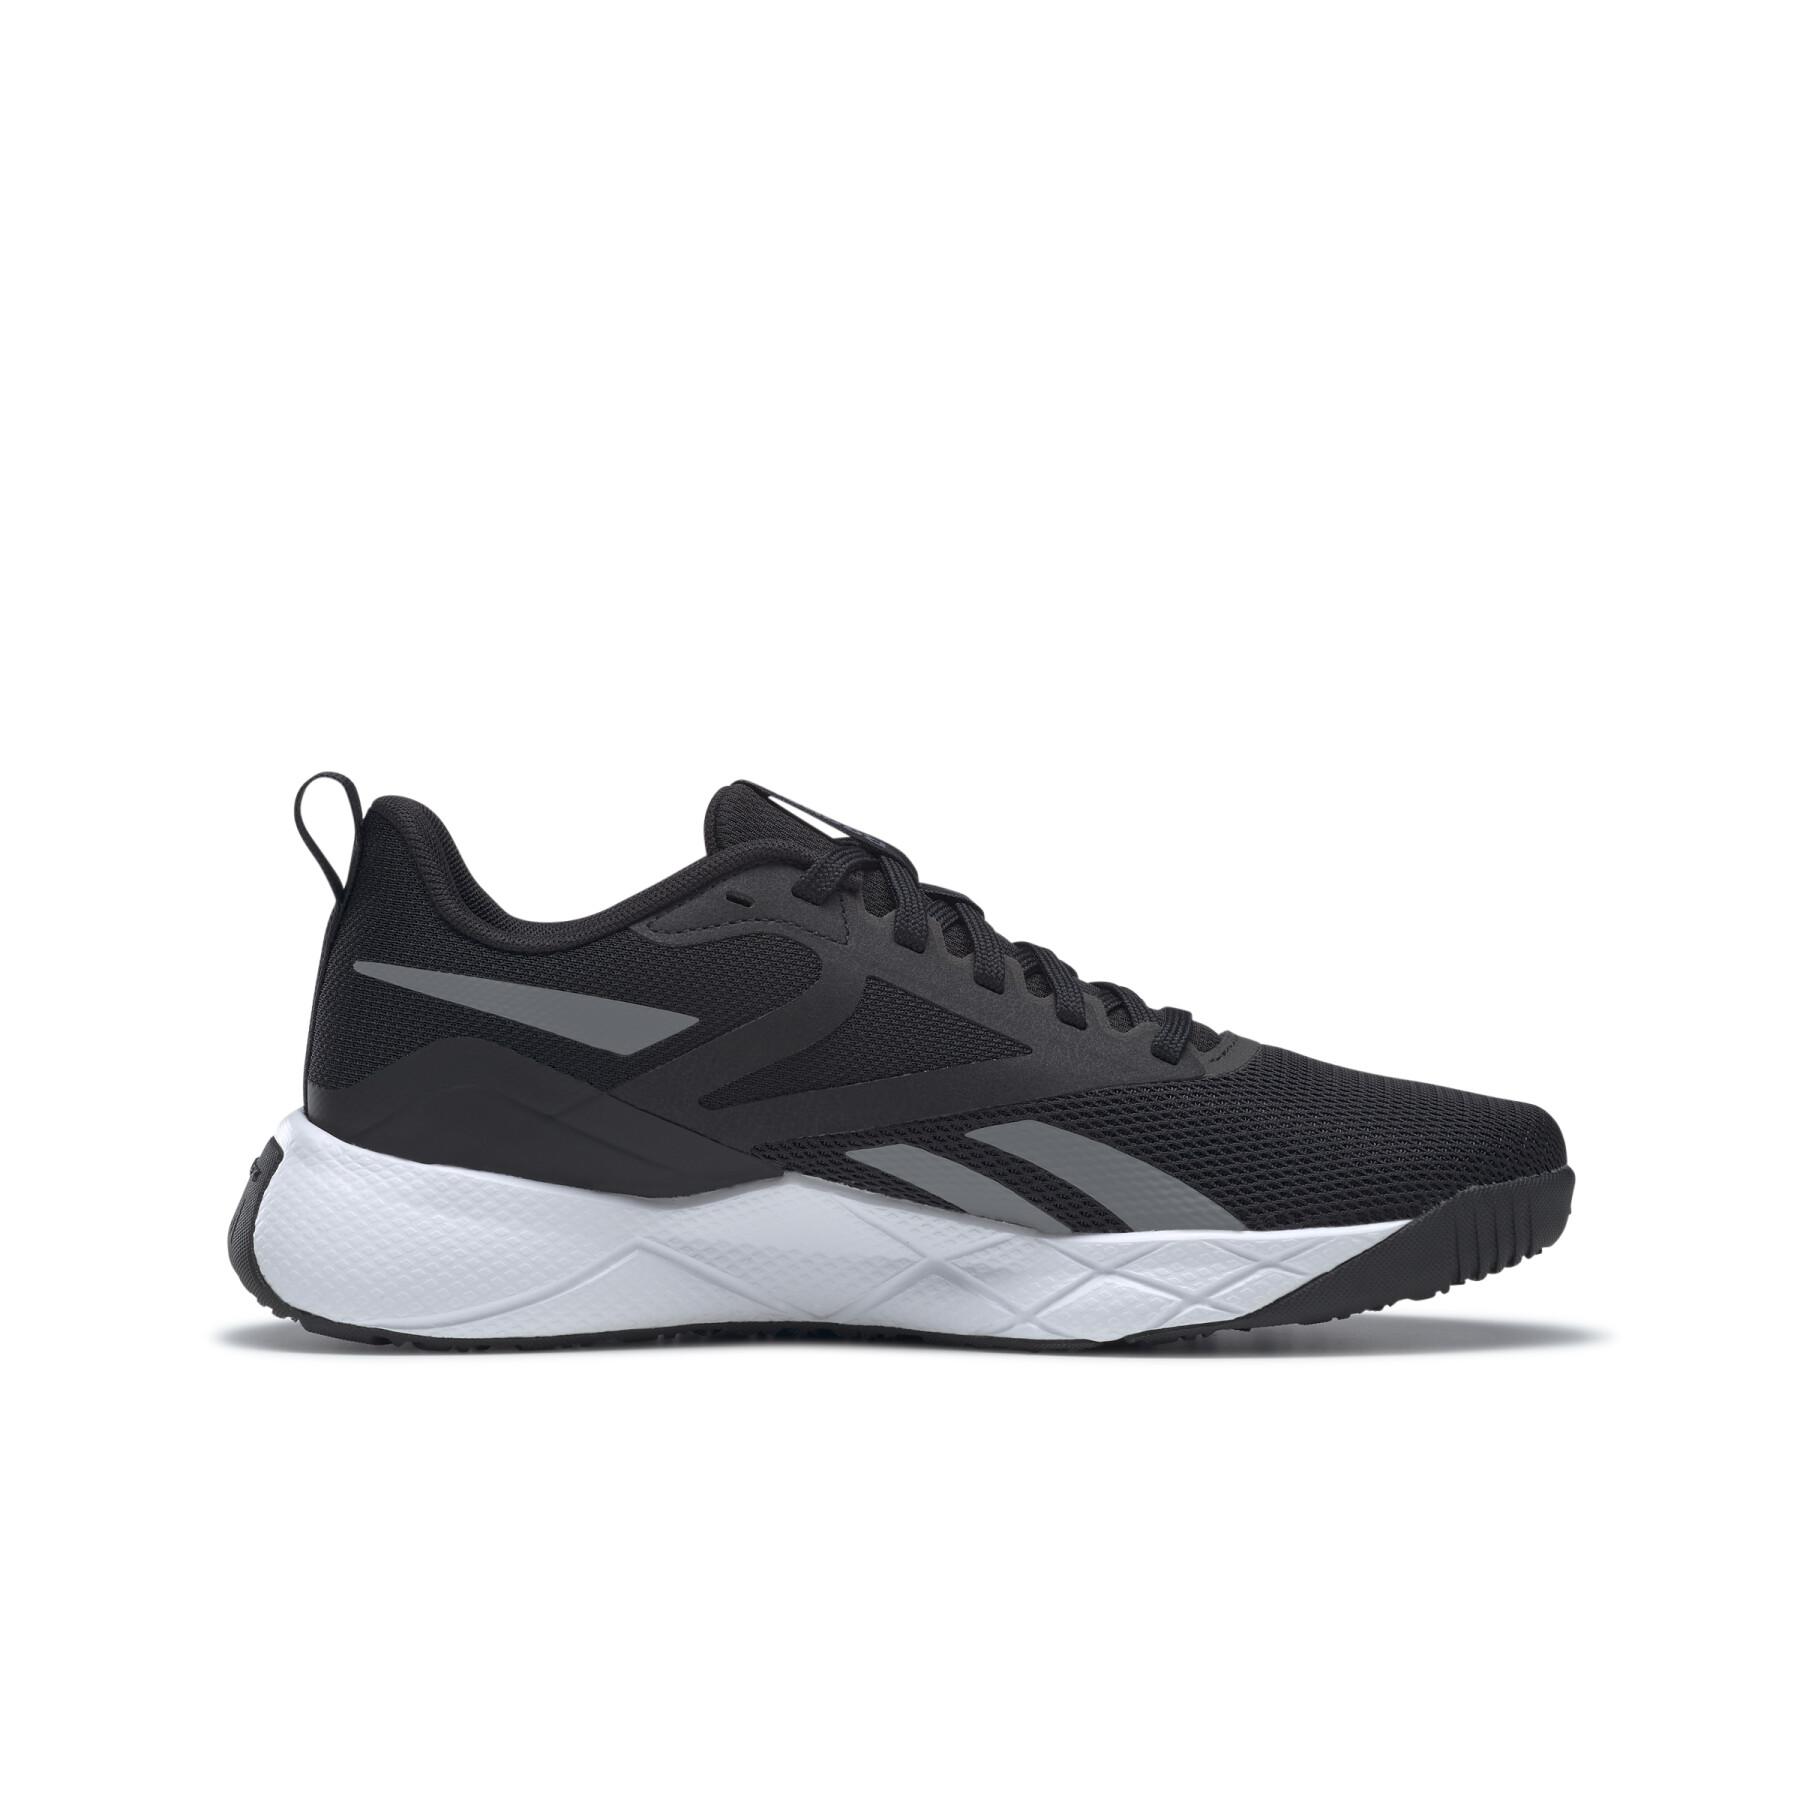 Chaussures femme Reebok NFX Trainers